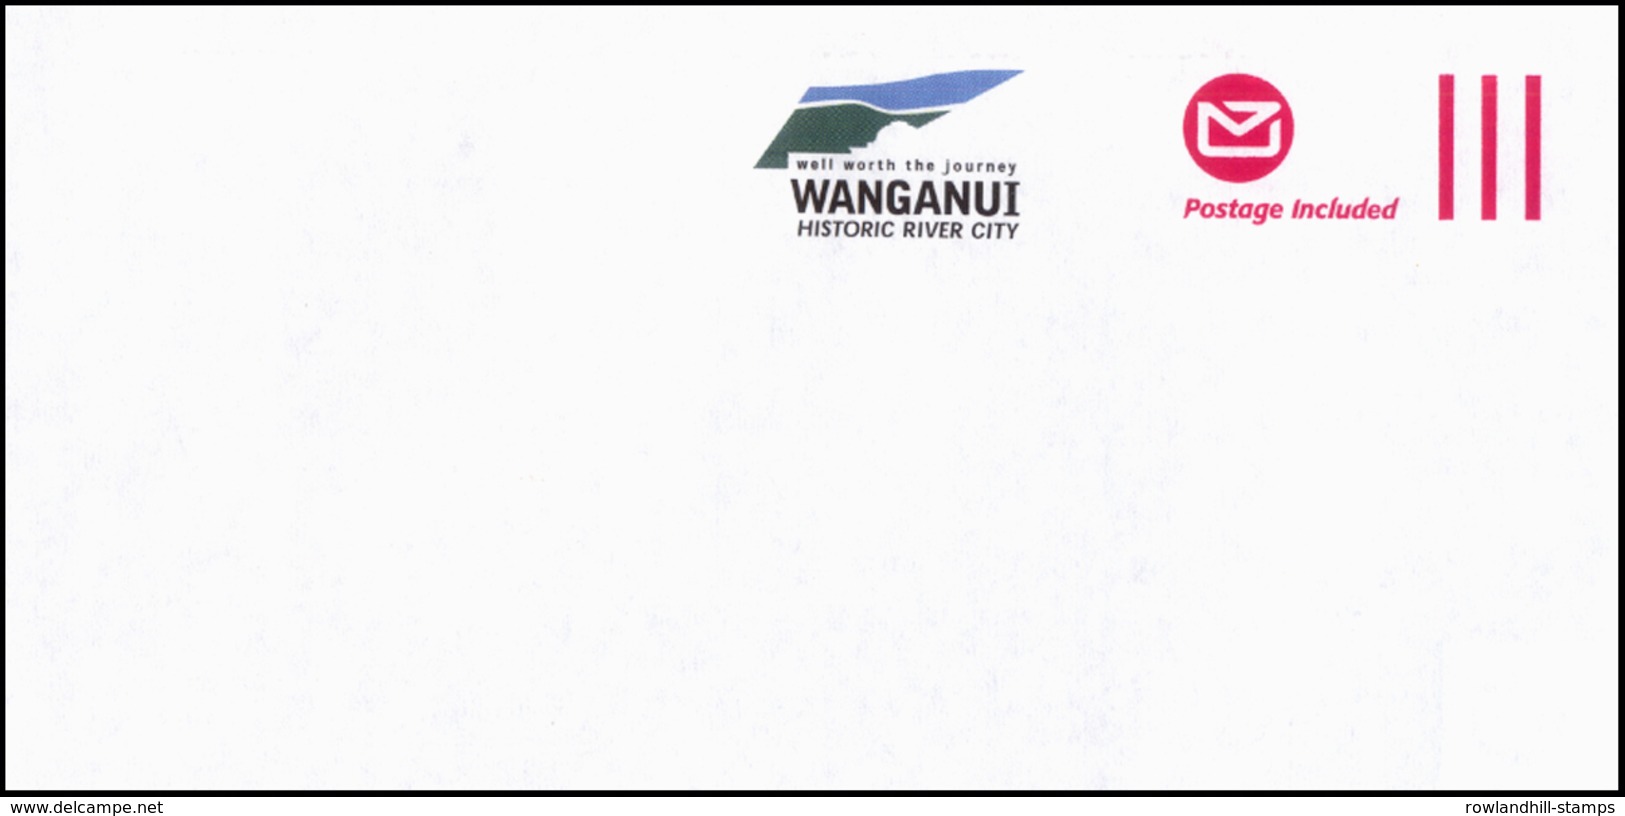 New Zealand, Official Postal Envelope, Stationery Prepaid Postage Included, Unused, WANGANUI, Historic River City Nature - Postal Stationery